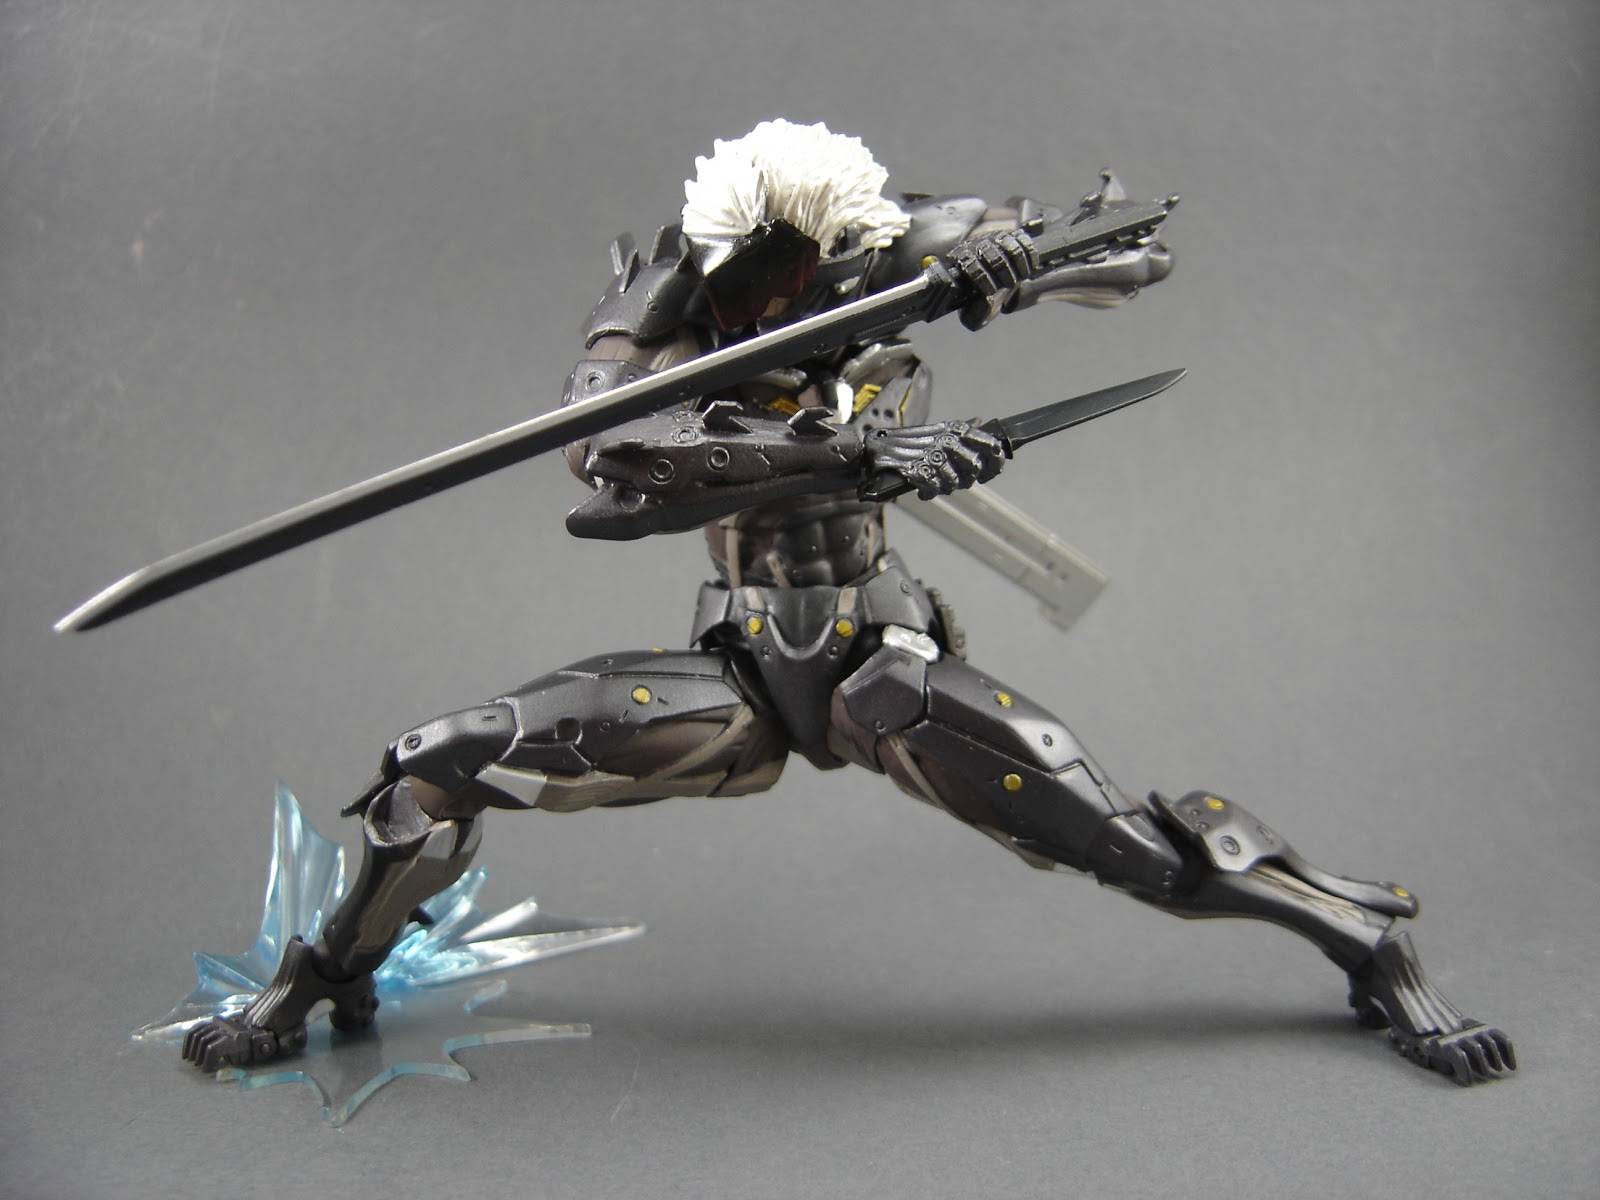 You can really do a lot with this revoltech action figure